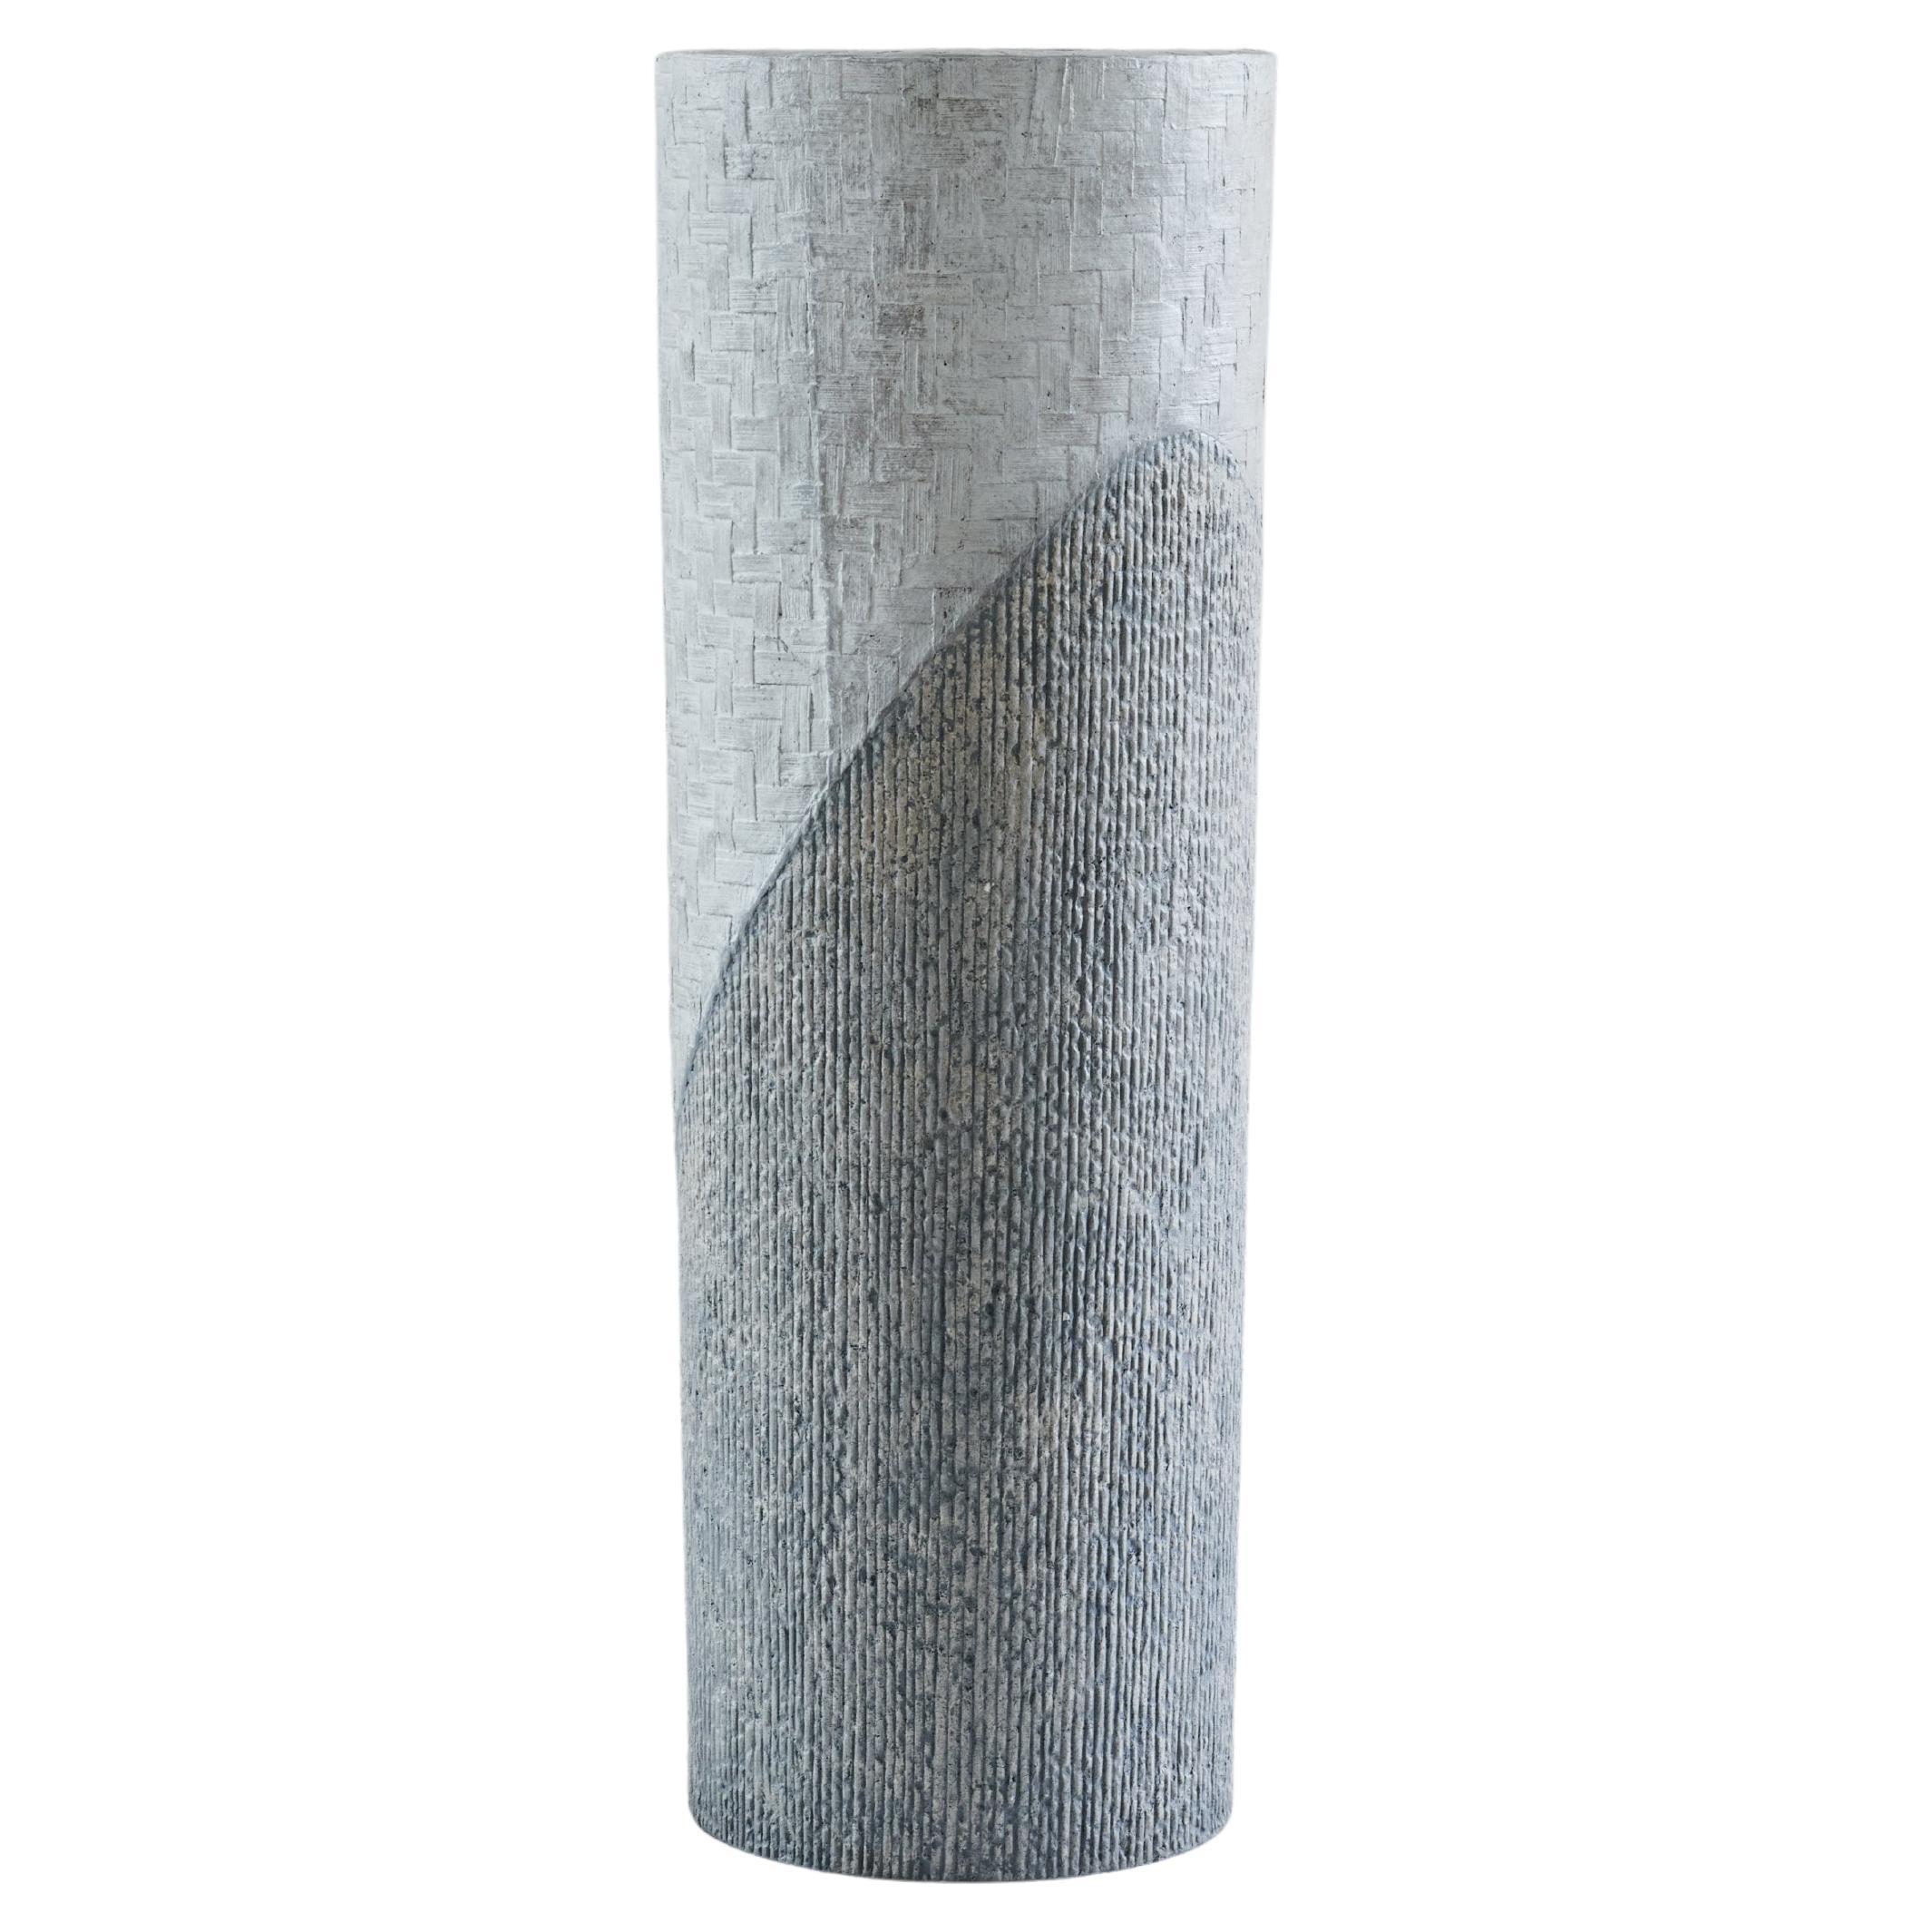 Tall White & Gray Crushed Limestone & Paper Composite Vessel by Studio Laurence For Sale